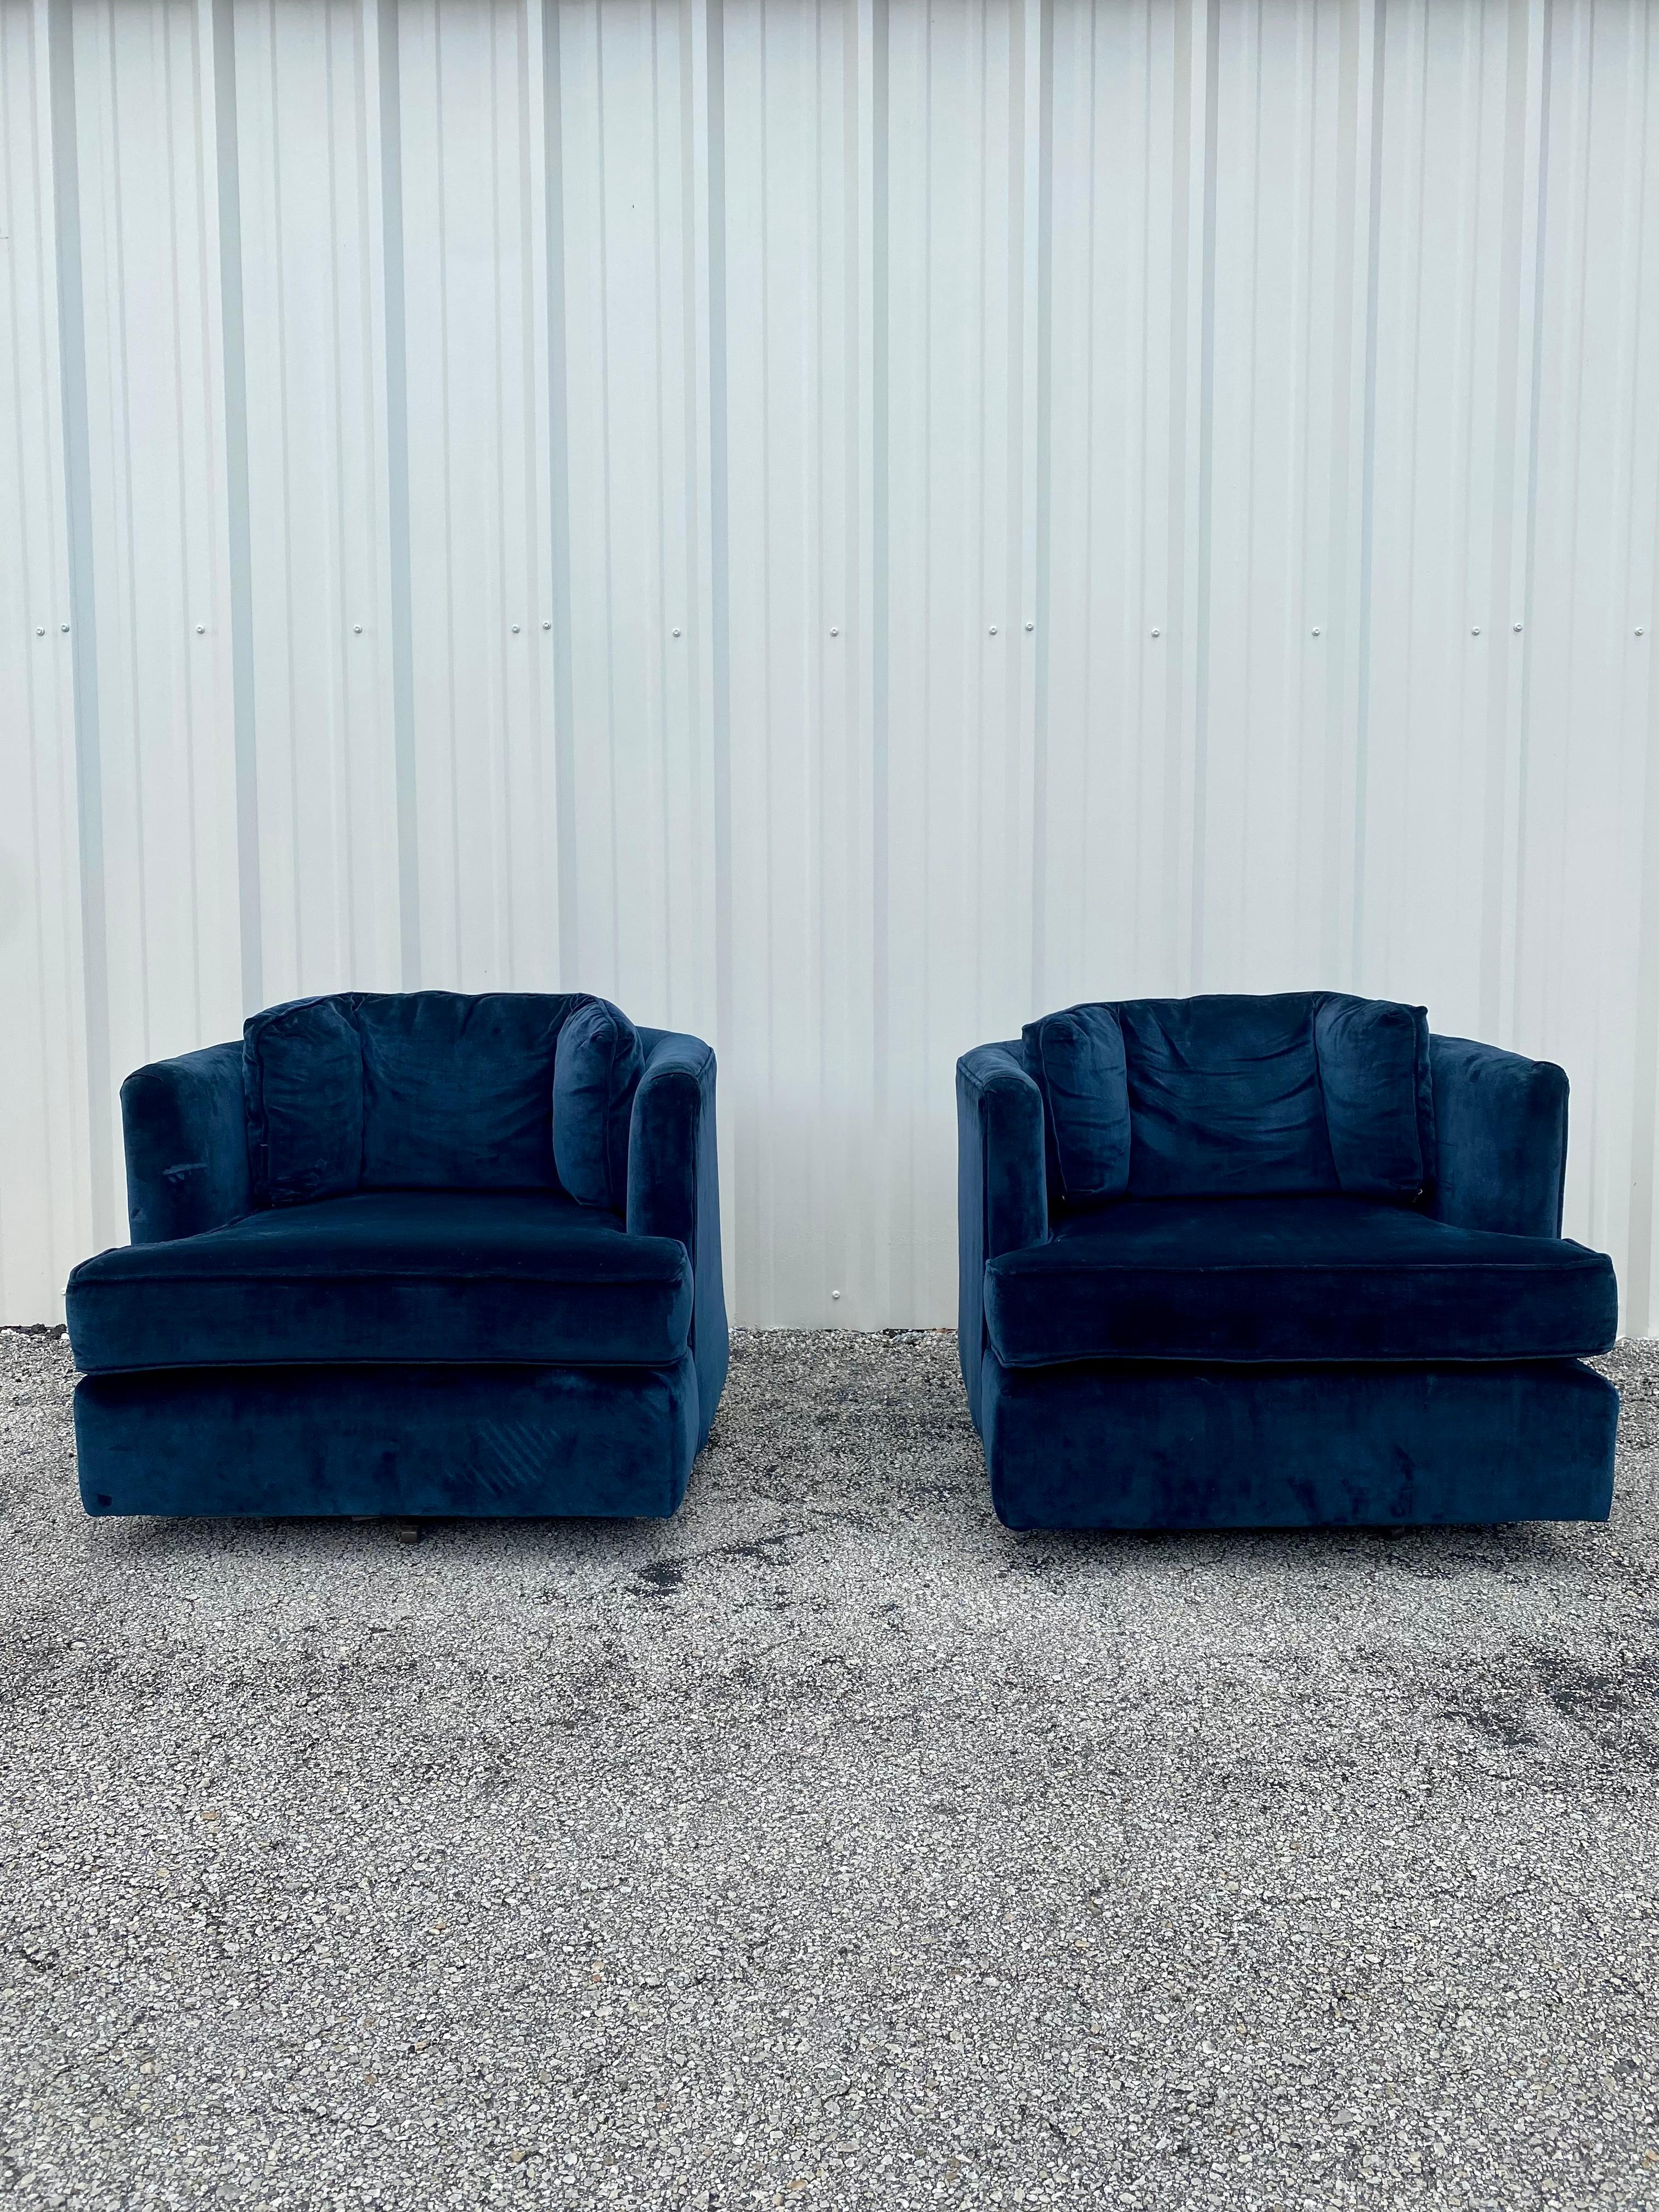 These extremely rare and stylish original navy blue velvet upholstered swivel chairs are packed with personality! Outstanding design is exhibited throughout. Their beautiful and sculptural shape are attributed to Milo Baughman. The chairs feature a